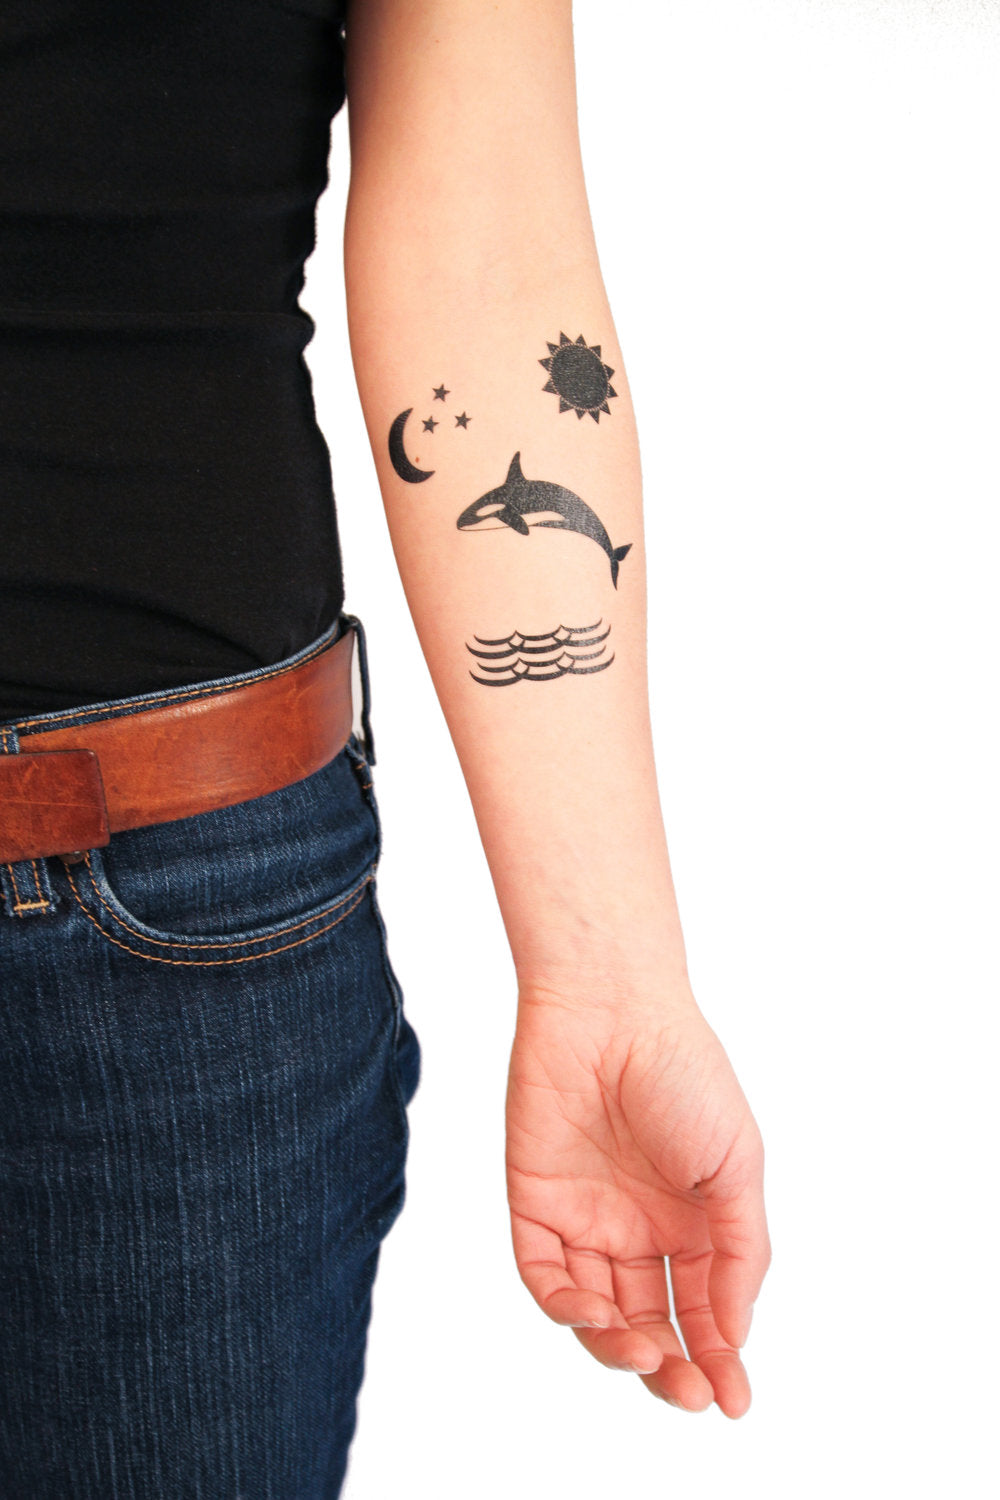 Temporary Tattoos for Adults Put a Grown-Up Spin on the Childhood Trend